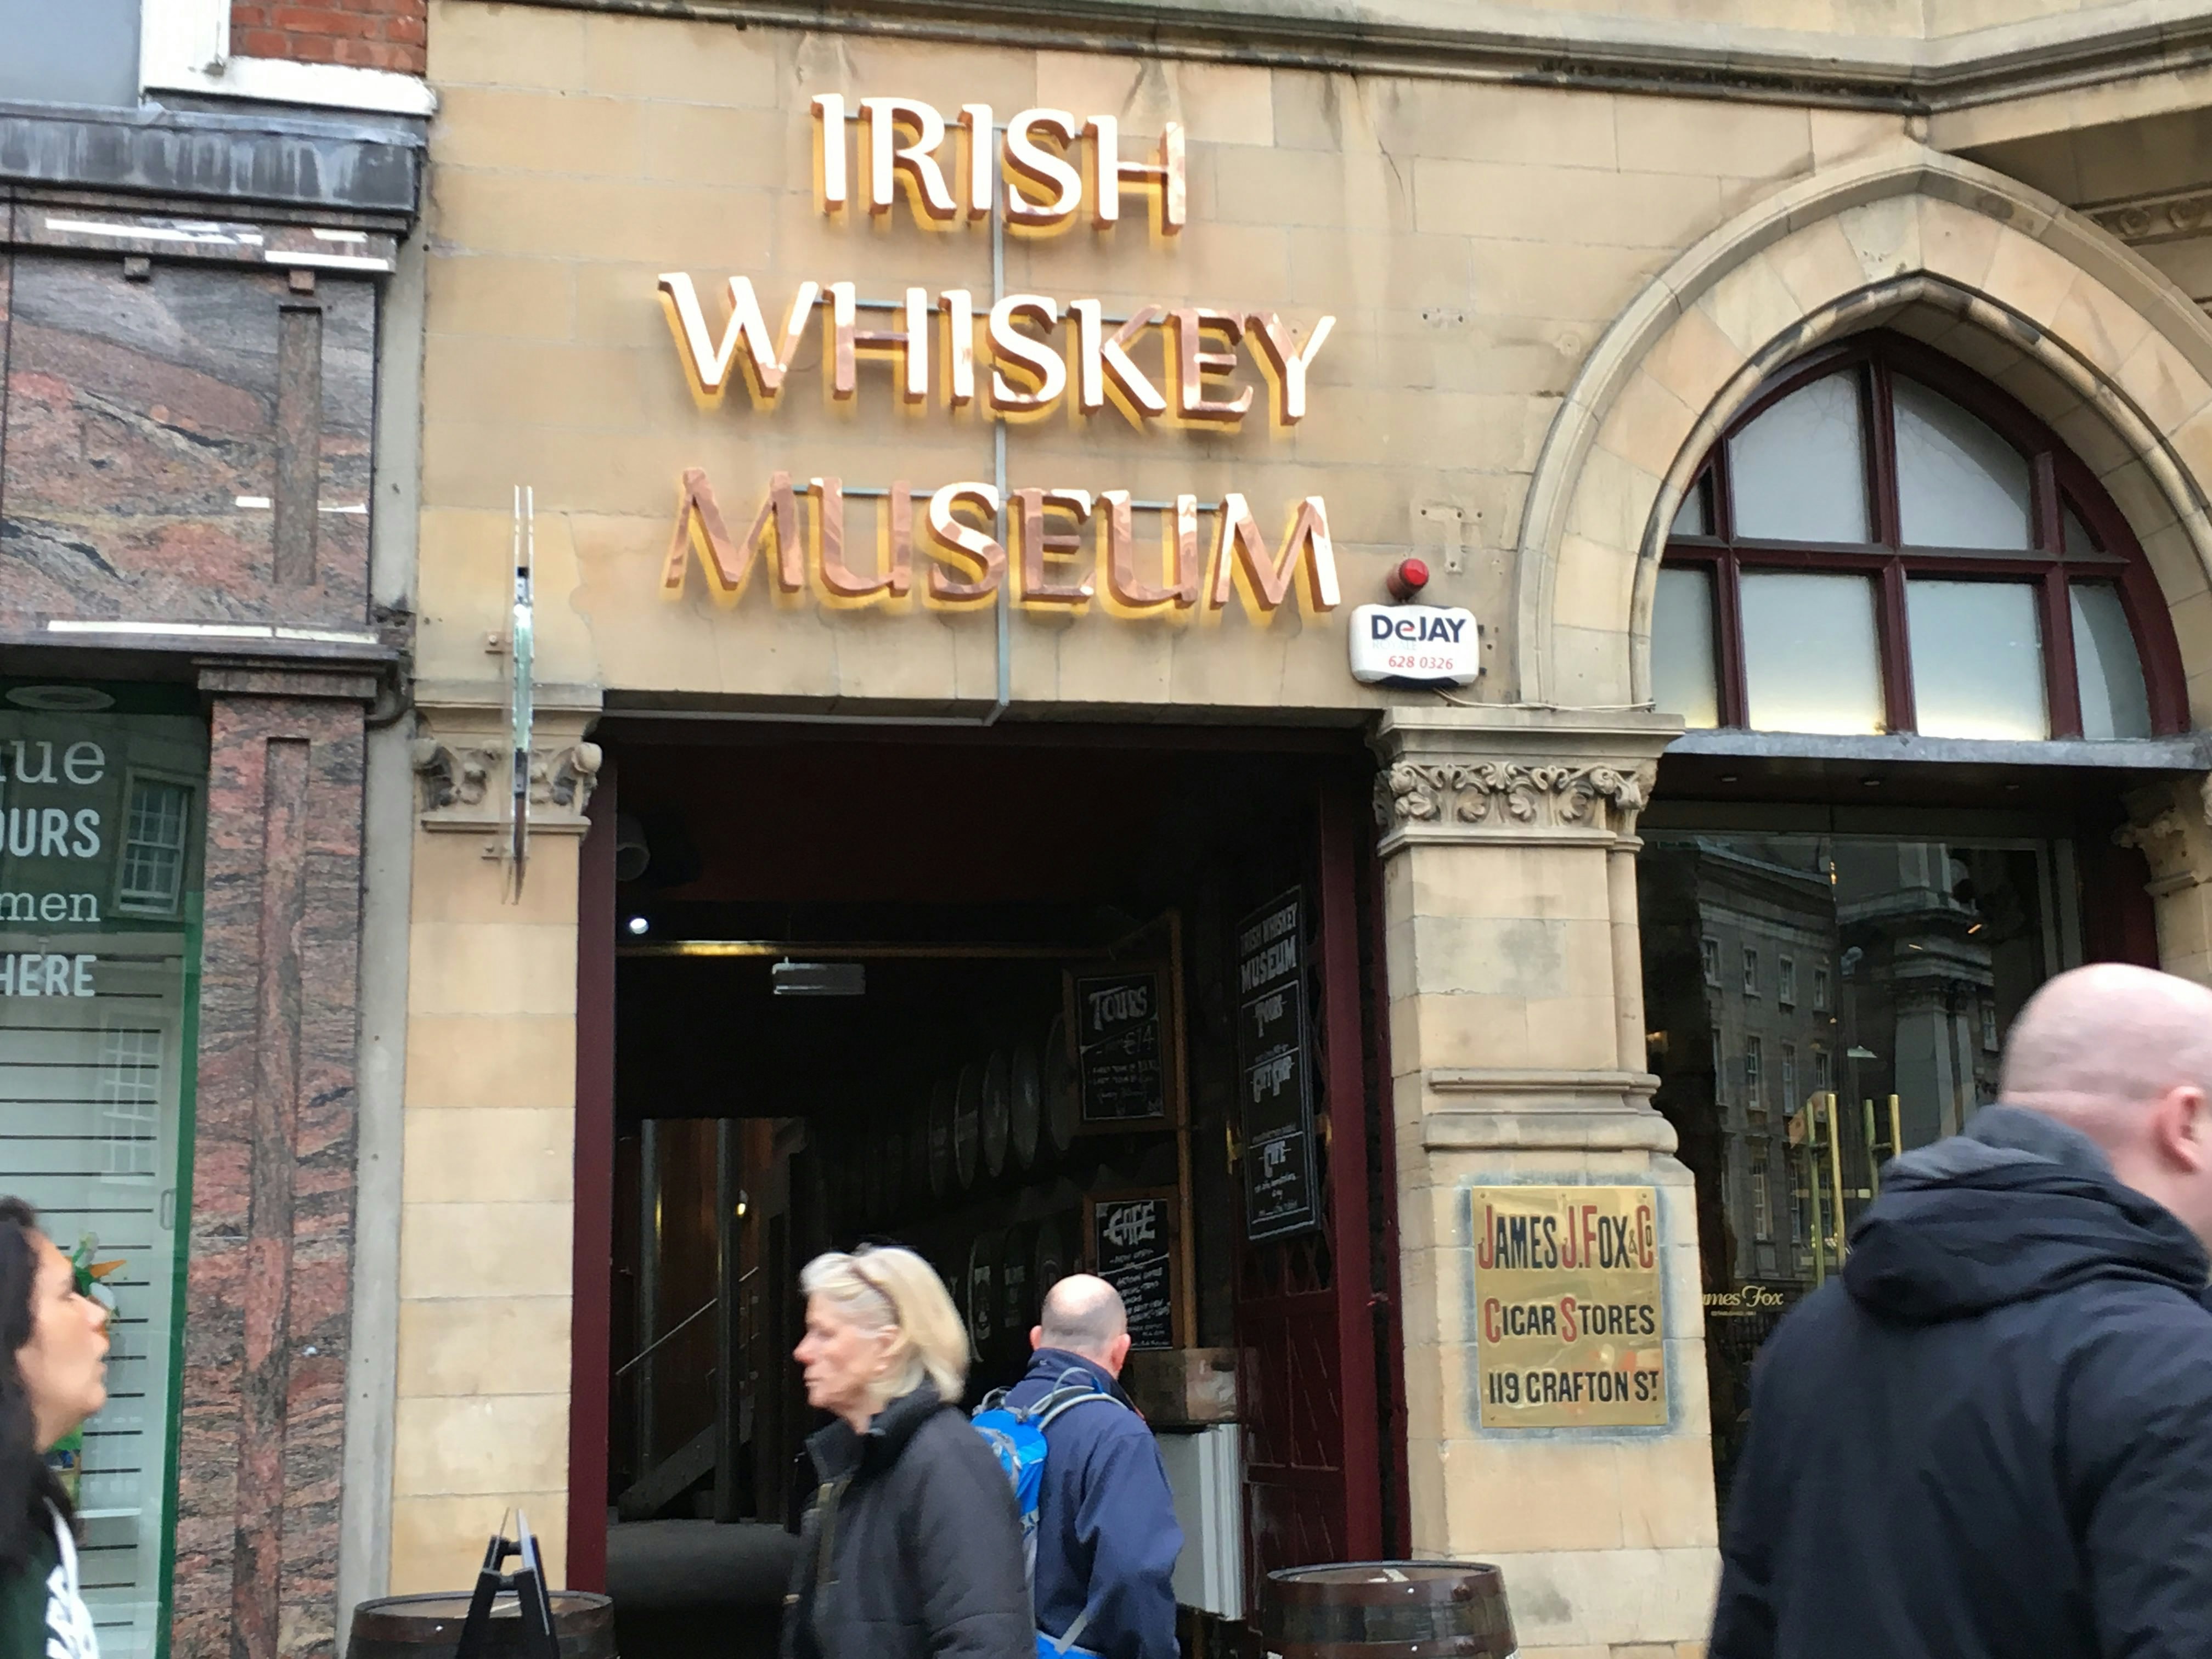 The exterior sign for Irish Whiskey Museum